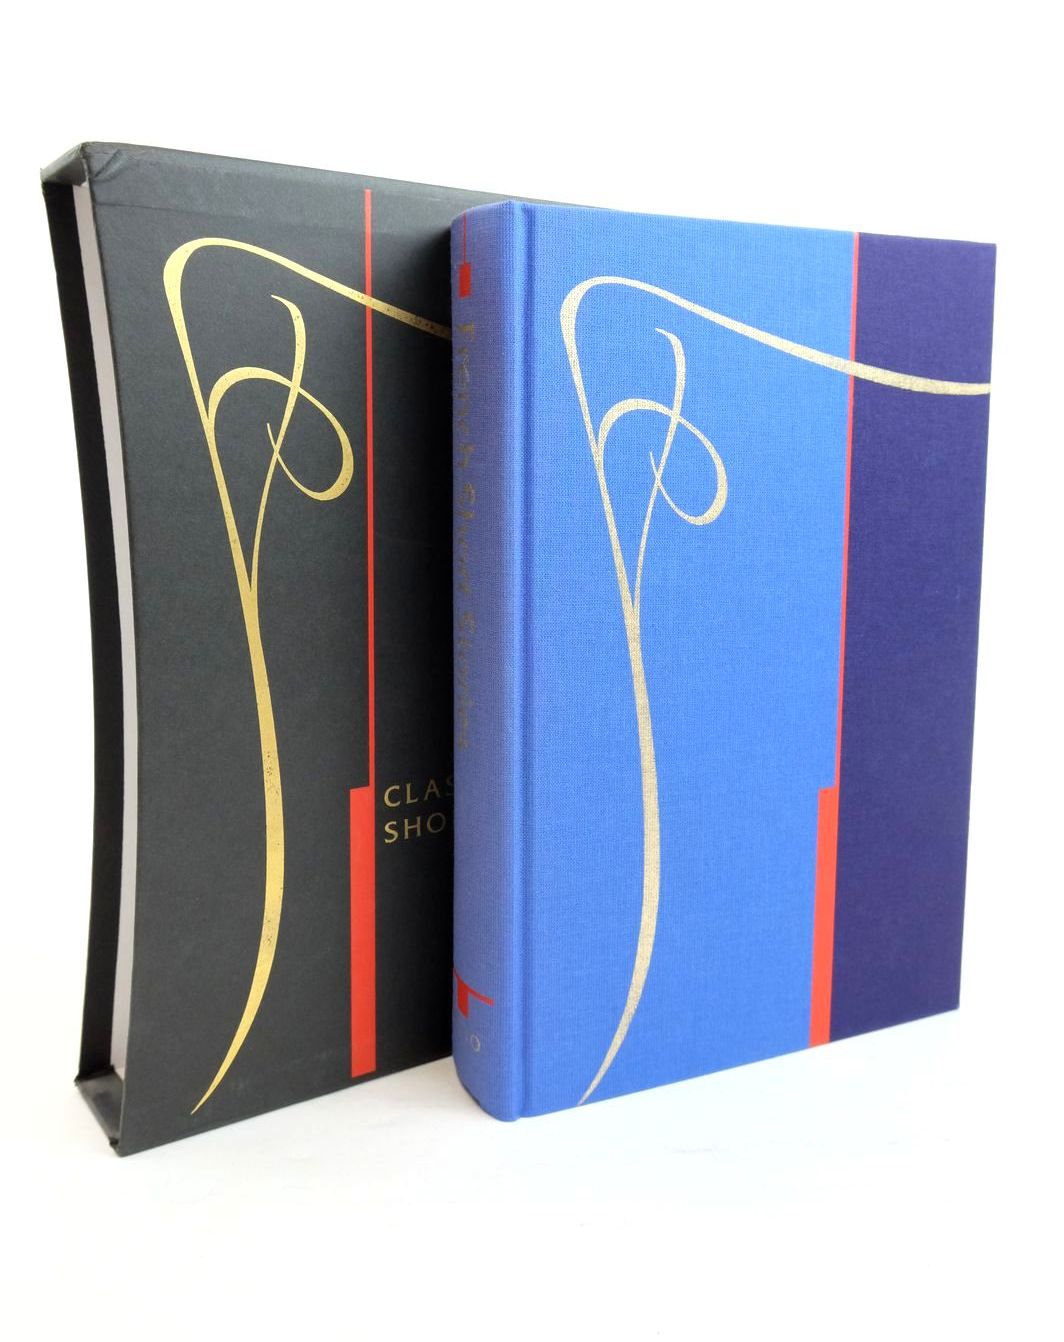 Photo of FRENCH SHORT STORIES written by Masters, Brian illustrated by Bour, Veronique published by Folio Society (STOCK CODE: 1320909)  for sale by Stella & Rose's Books